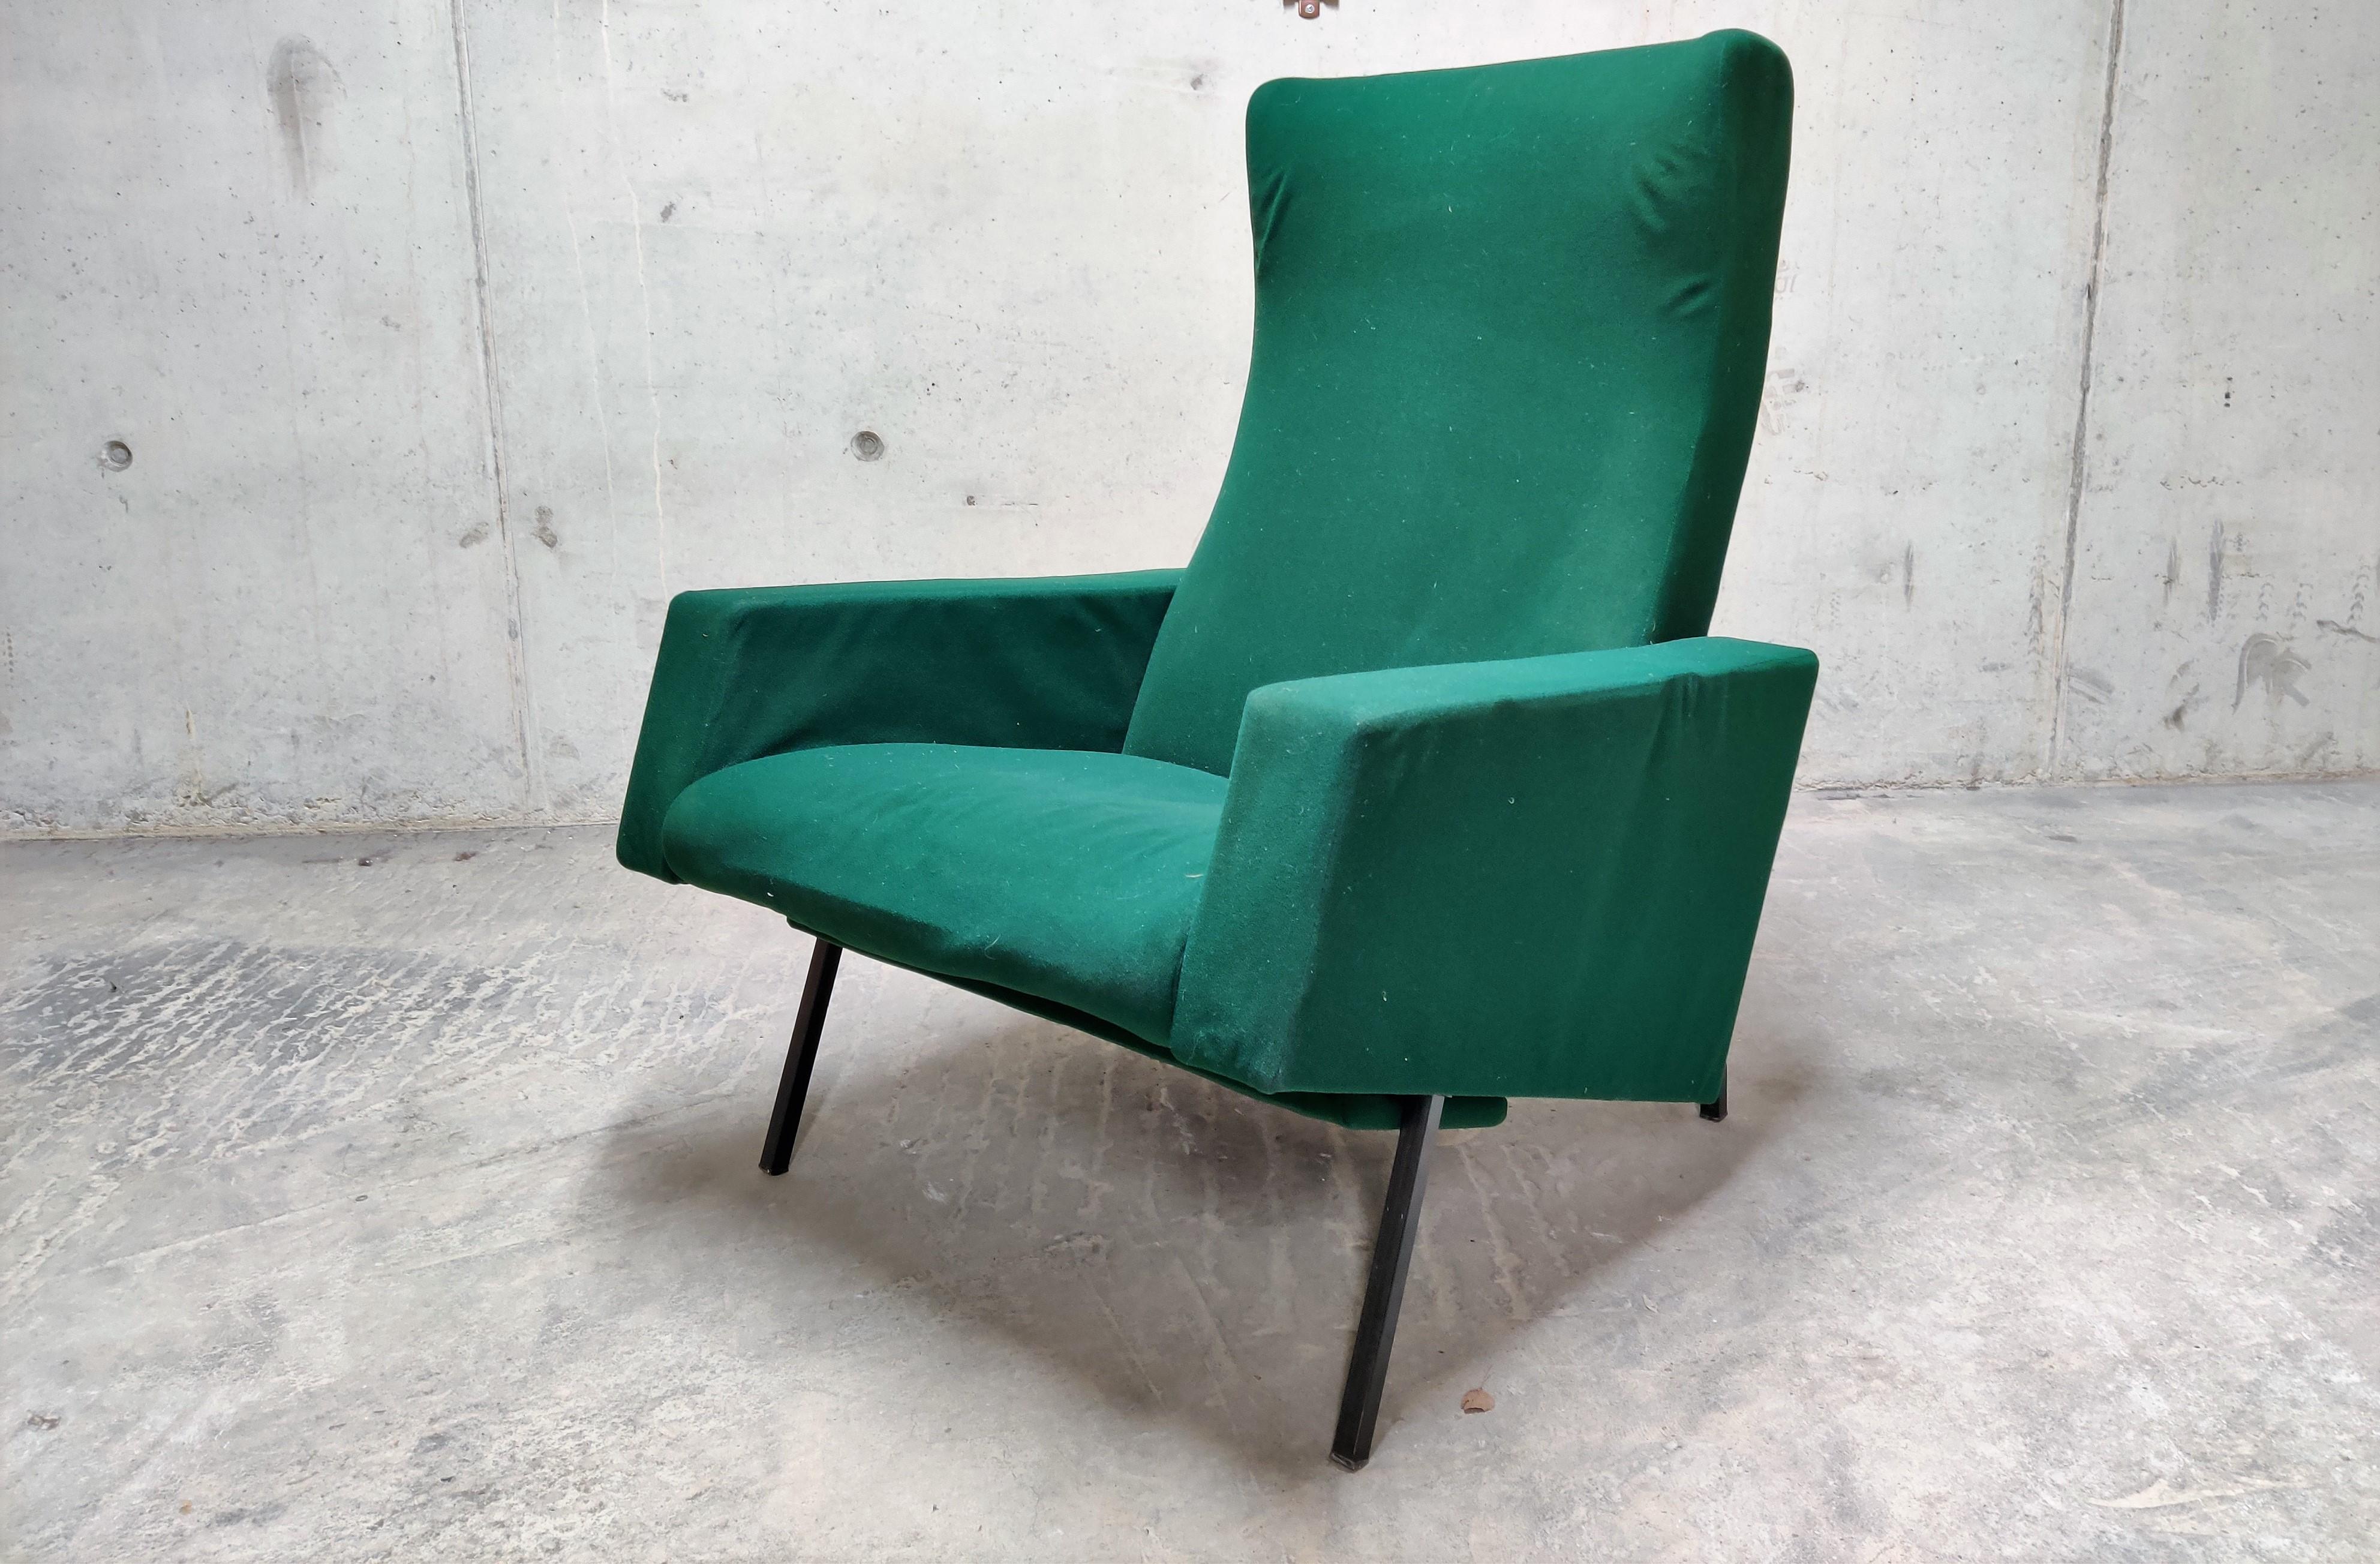 Mid-Century Modern Vintage Trelax Chair by Pierre Guariche for Meurop, 1950s For Sale